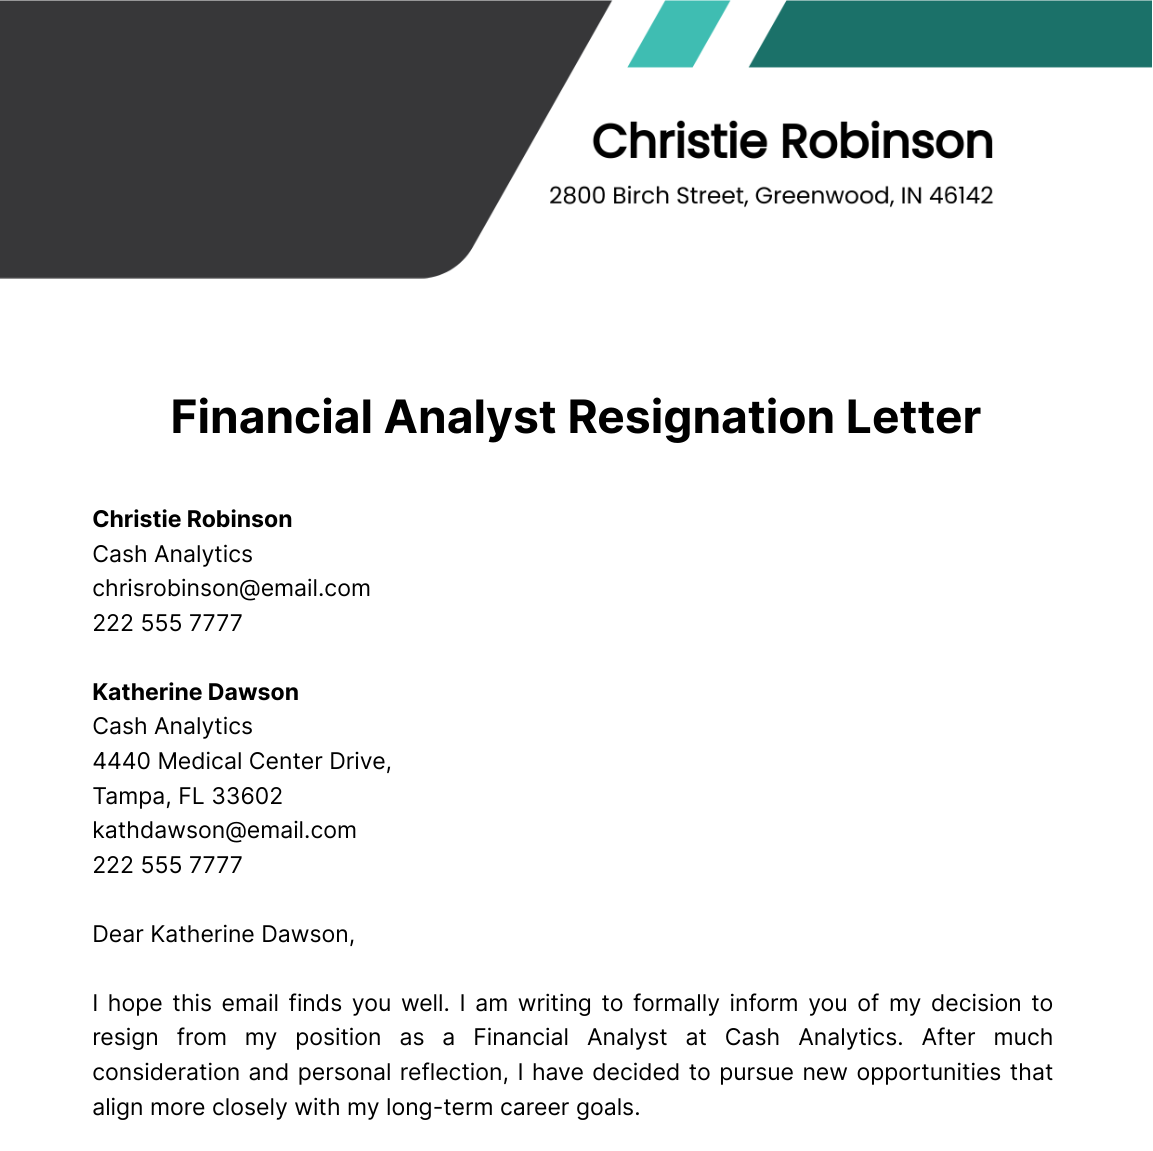 Financial Analyst Resignation Letter  Template